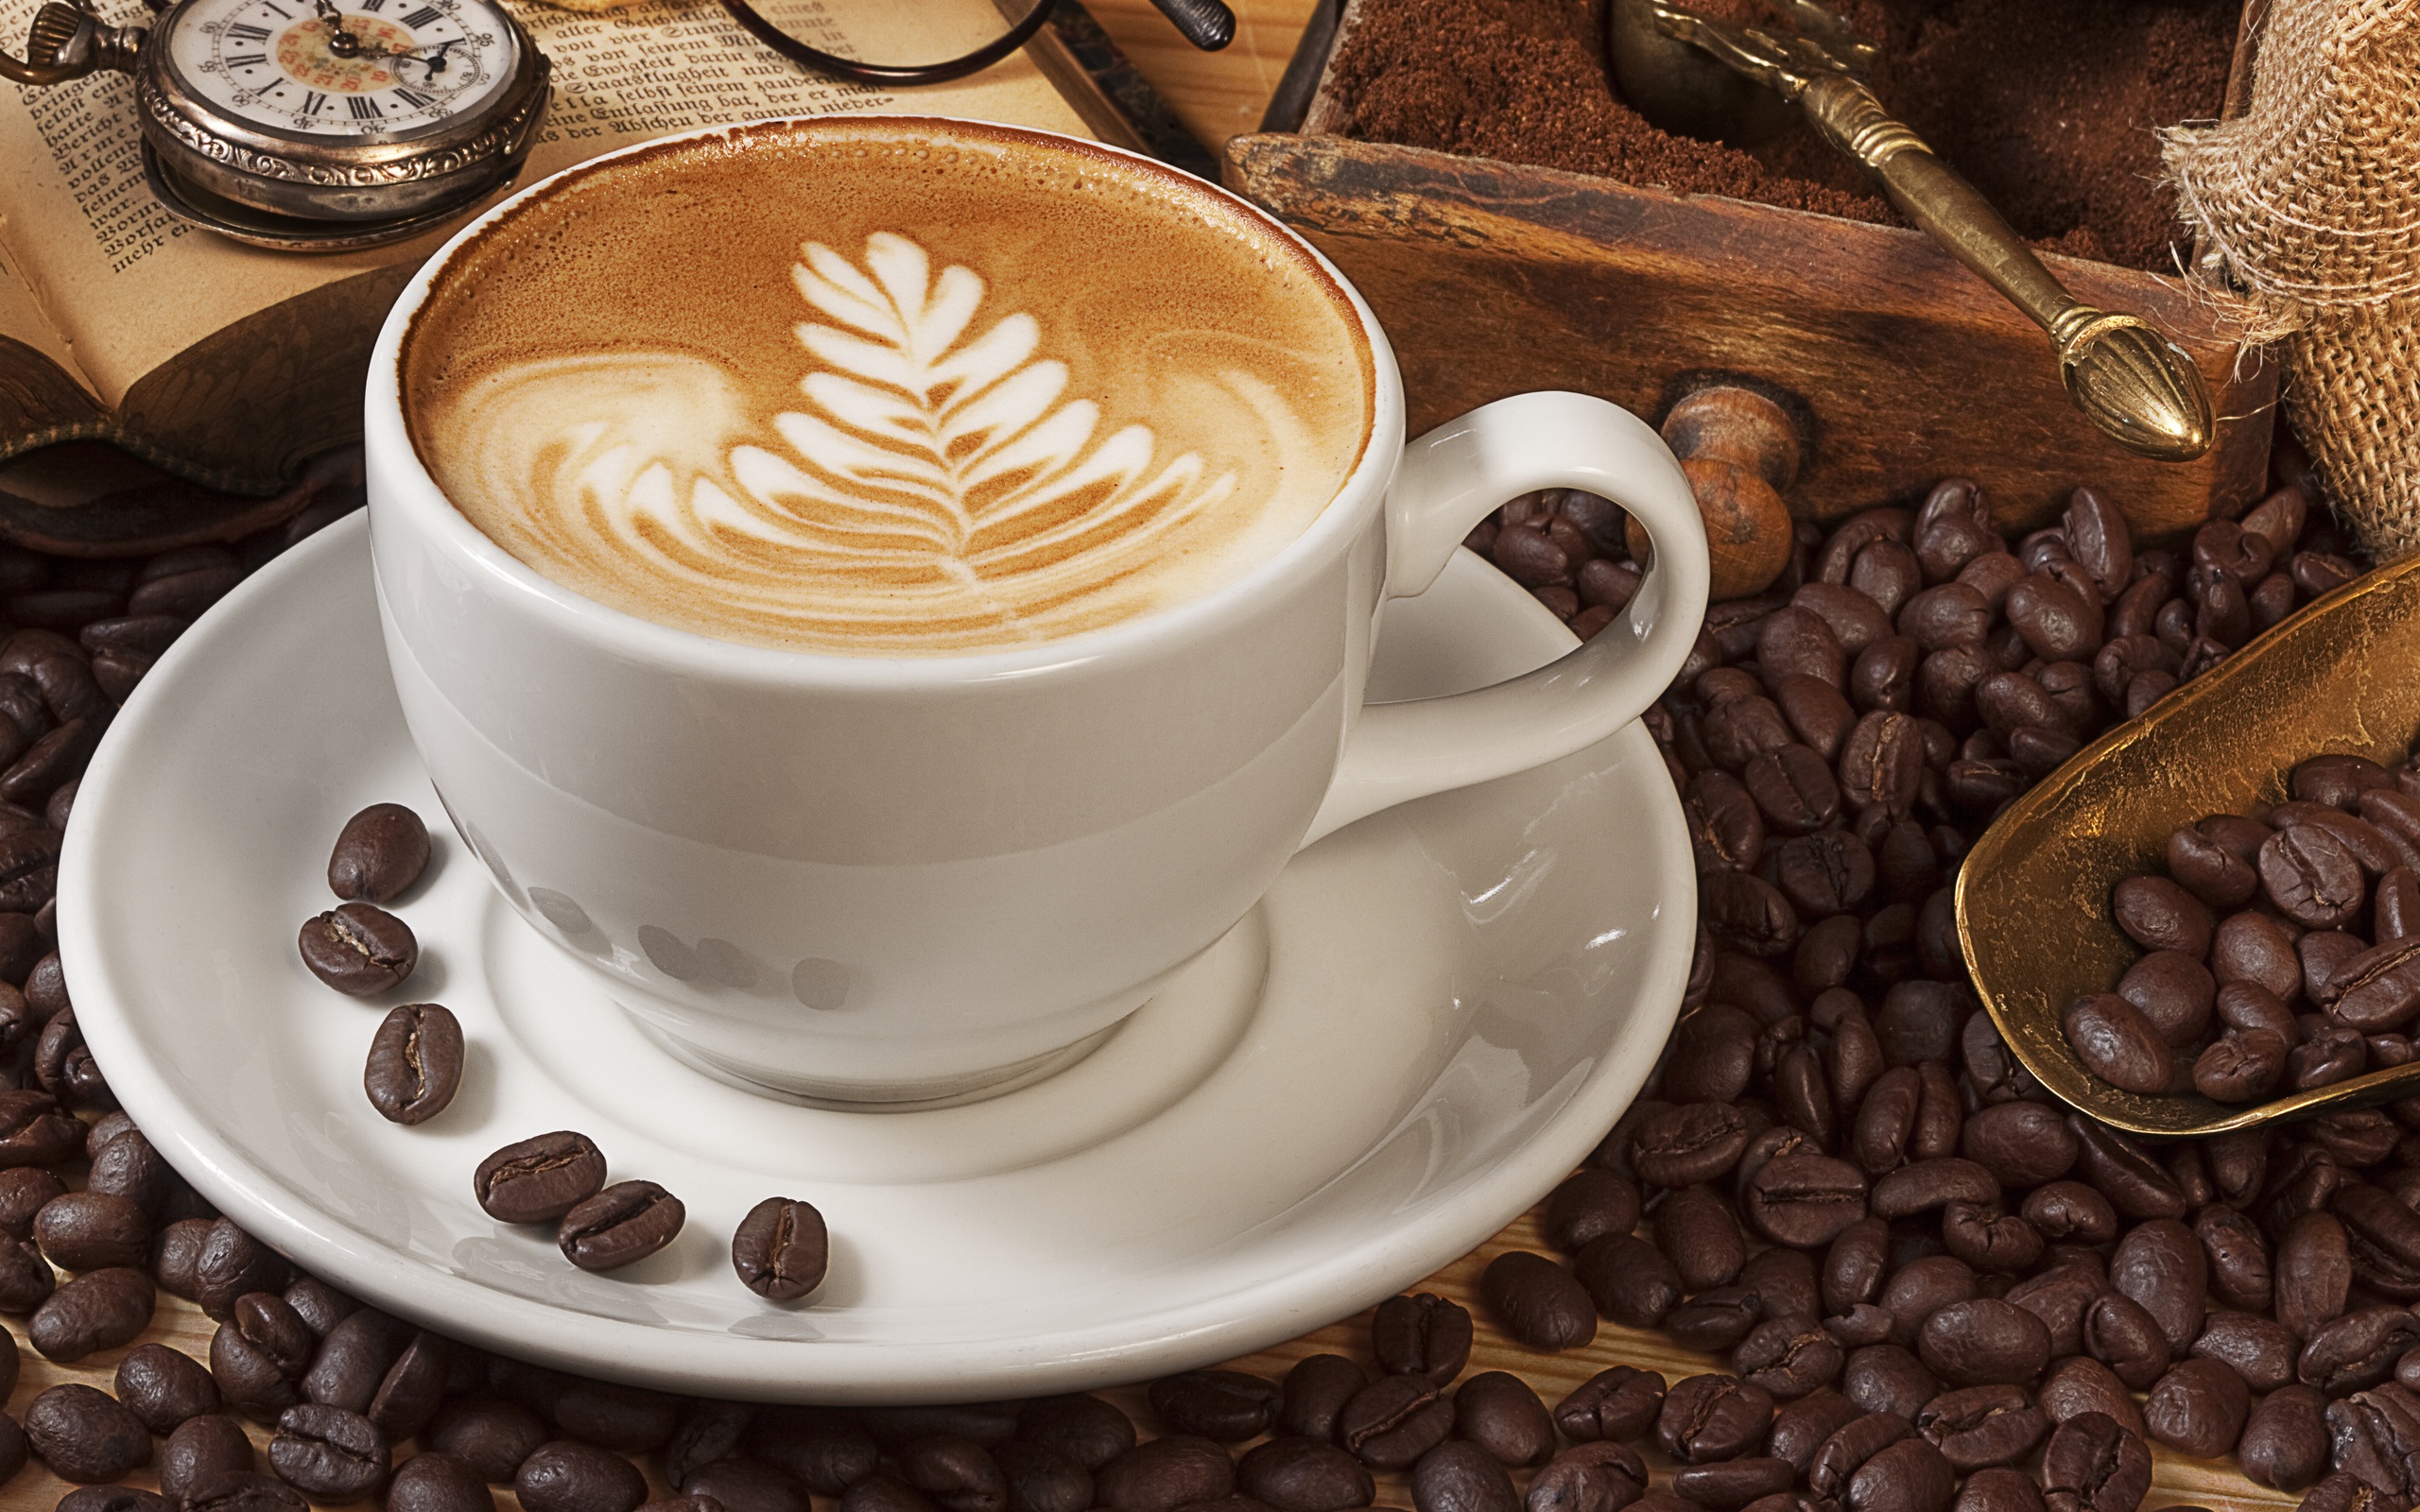 https://www.swansalford.co.uk/wp-content/uploads/sites/15/2015/08/specialty-coffee-cappuccino-latte-hot-chocolate-mocha.jpg